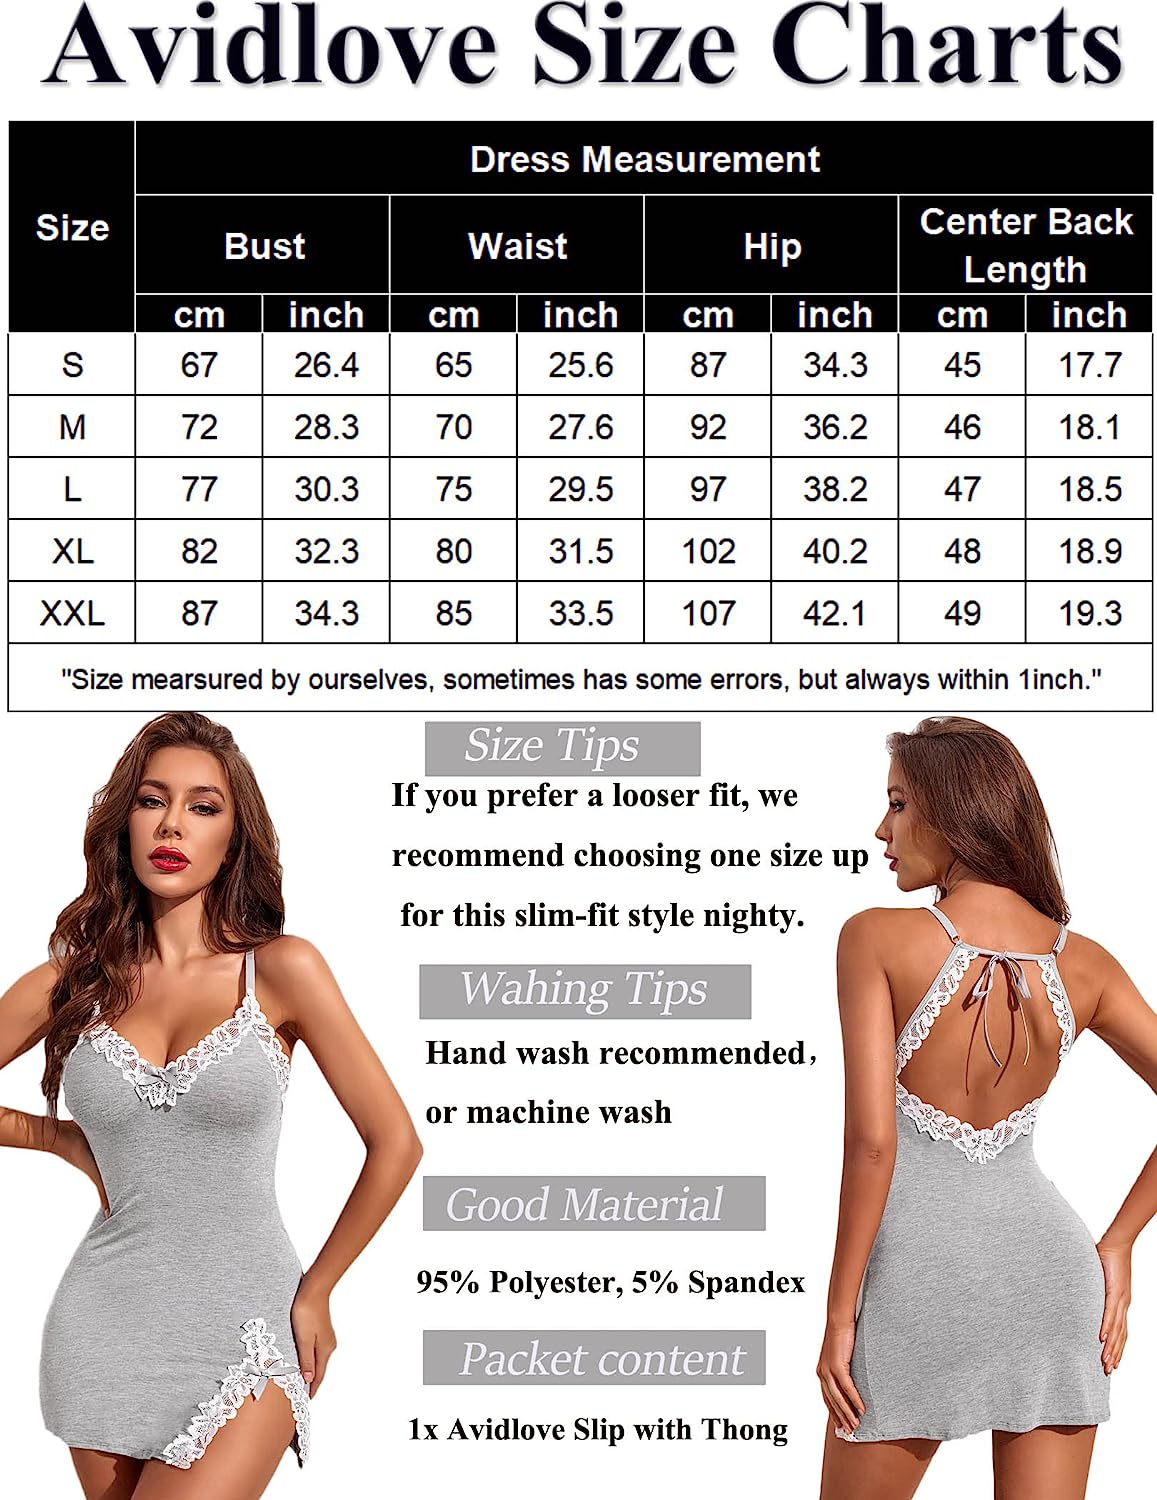 Avidlove Lingerie Lace Babydoll V Neck Sleepwear Cotton Nightgowns for Chemise